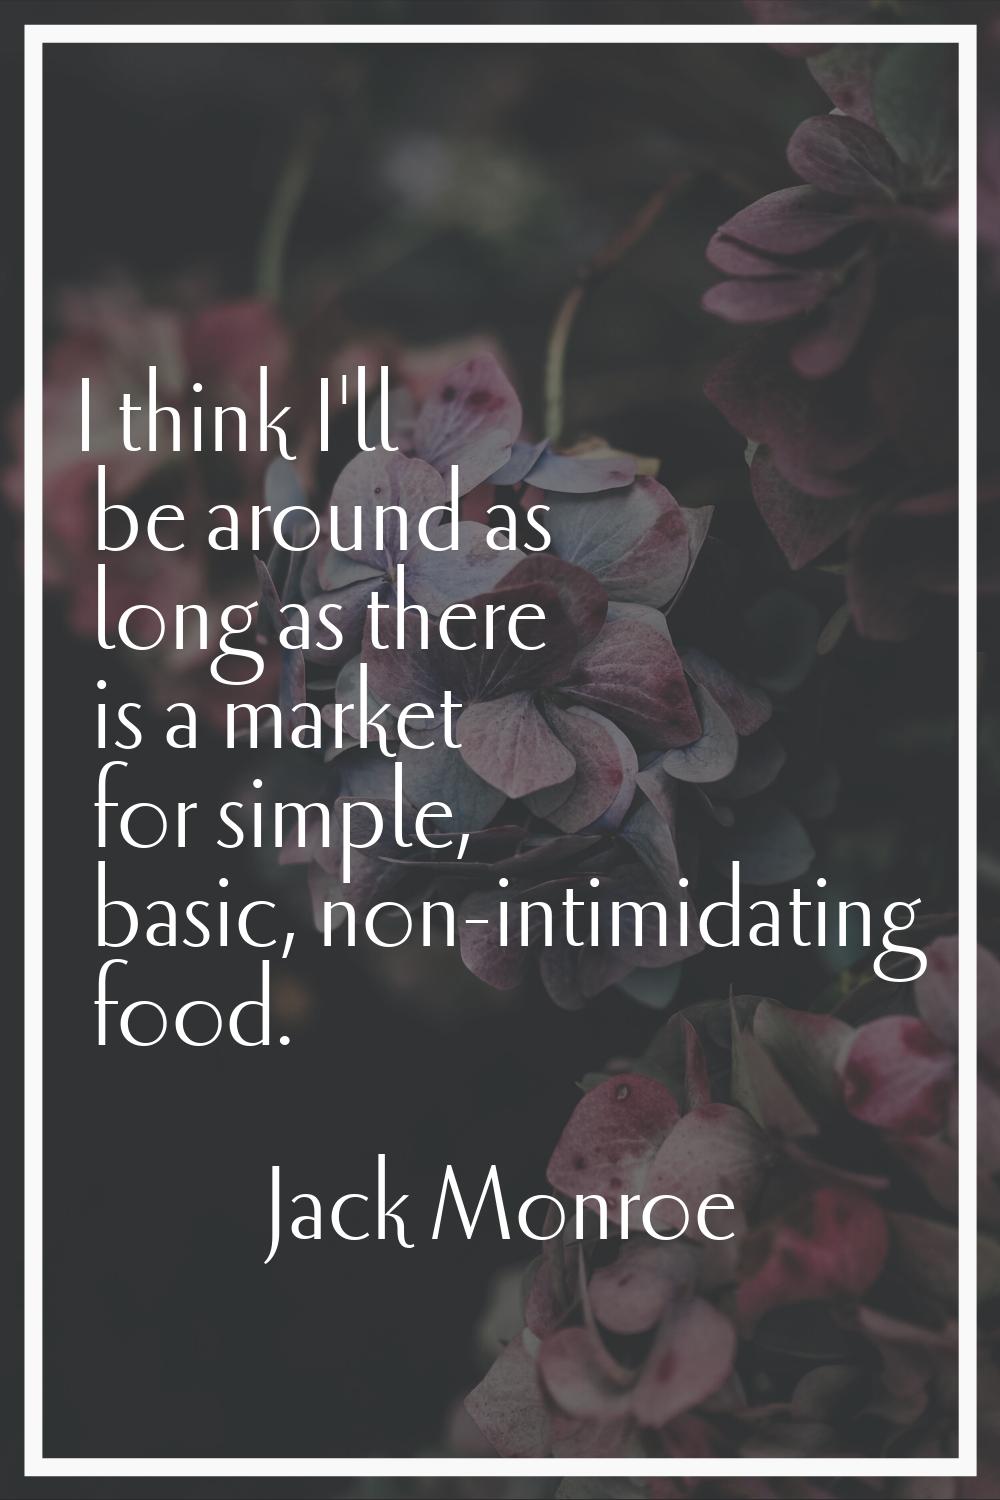 I think I'll be around as long as there is a market for simple, basic, non-intimidating food.